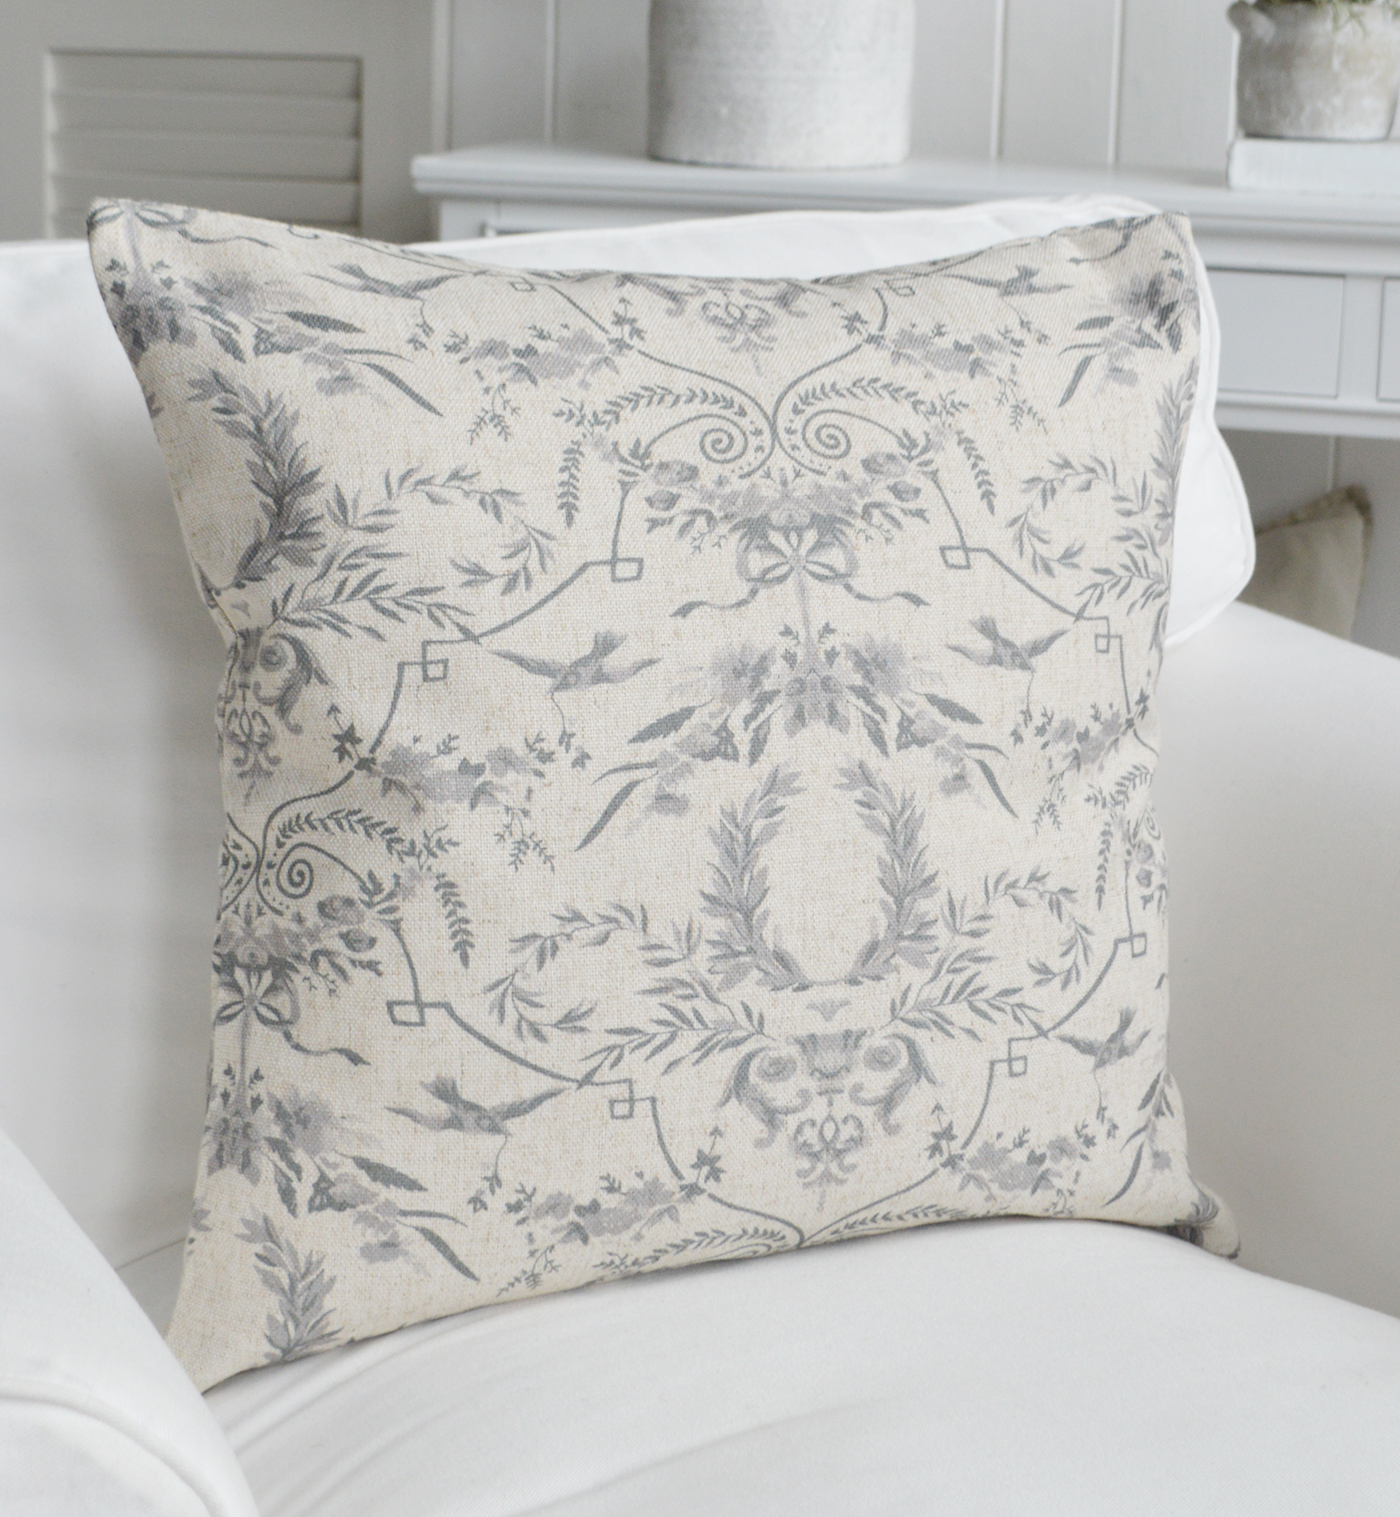 Serenity Luxury Cushion - New England, Hamptons, Modern Farmhouse and Country and coastal cushions and interiors